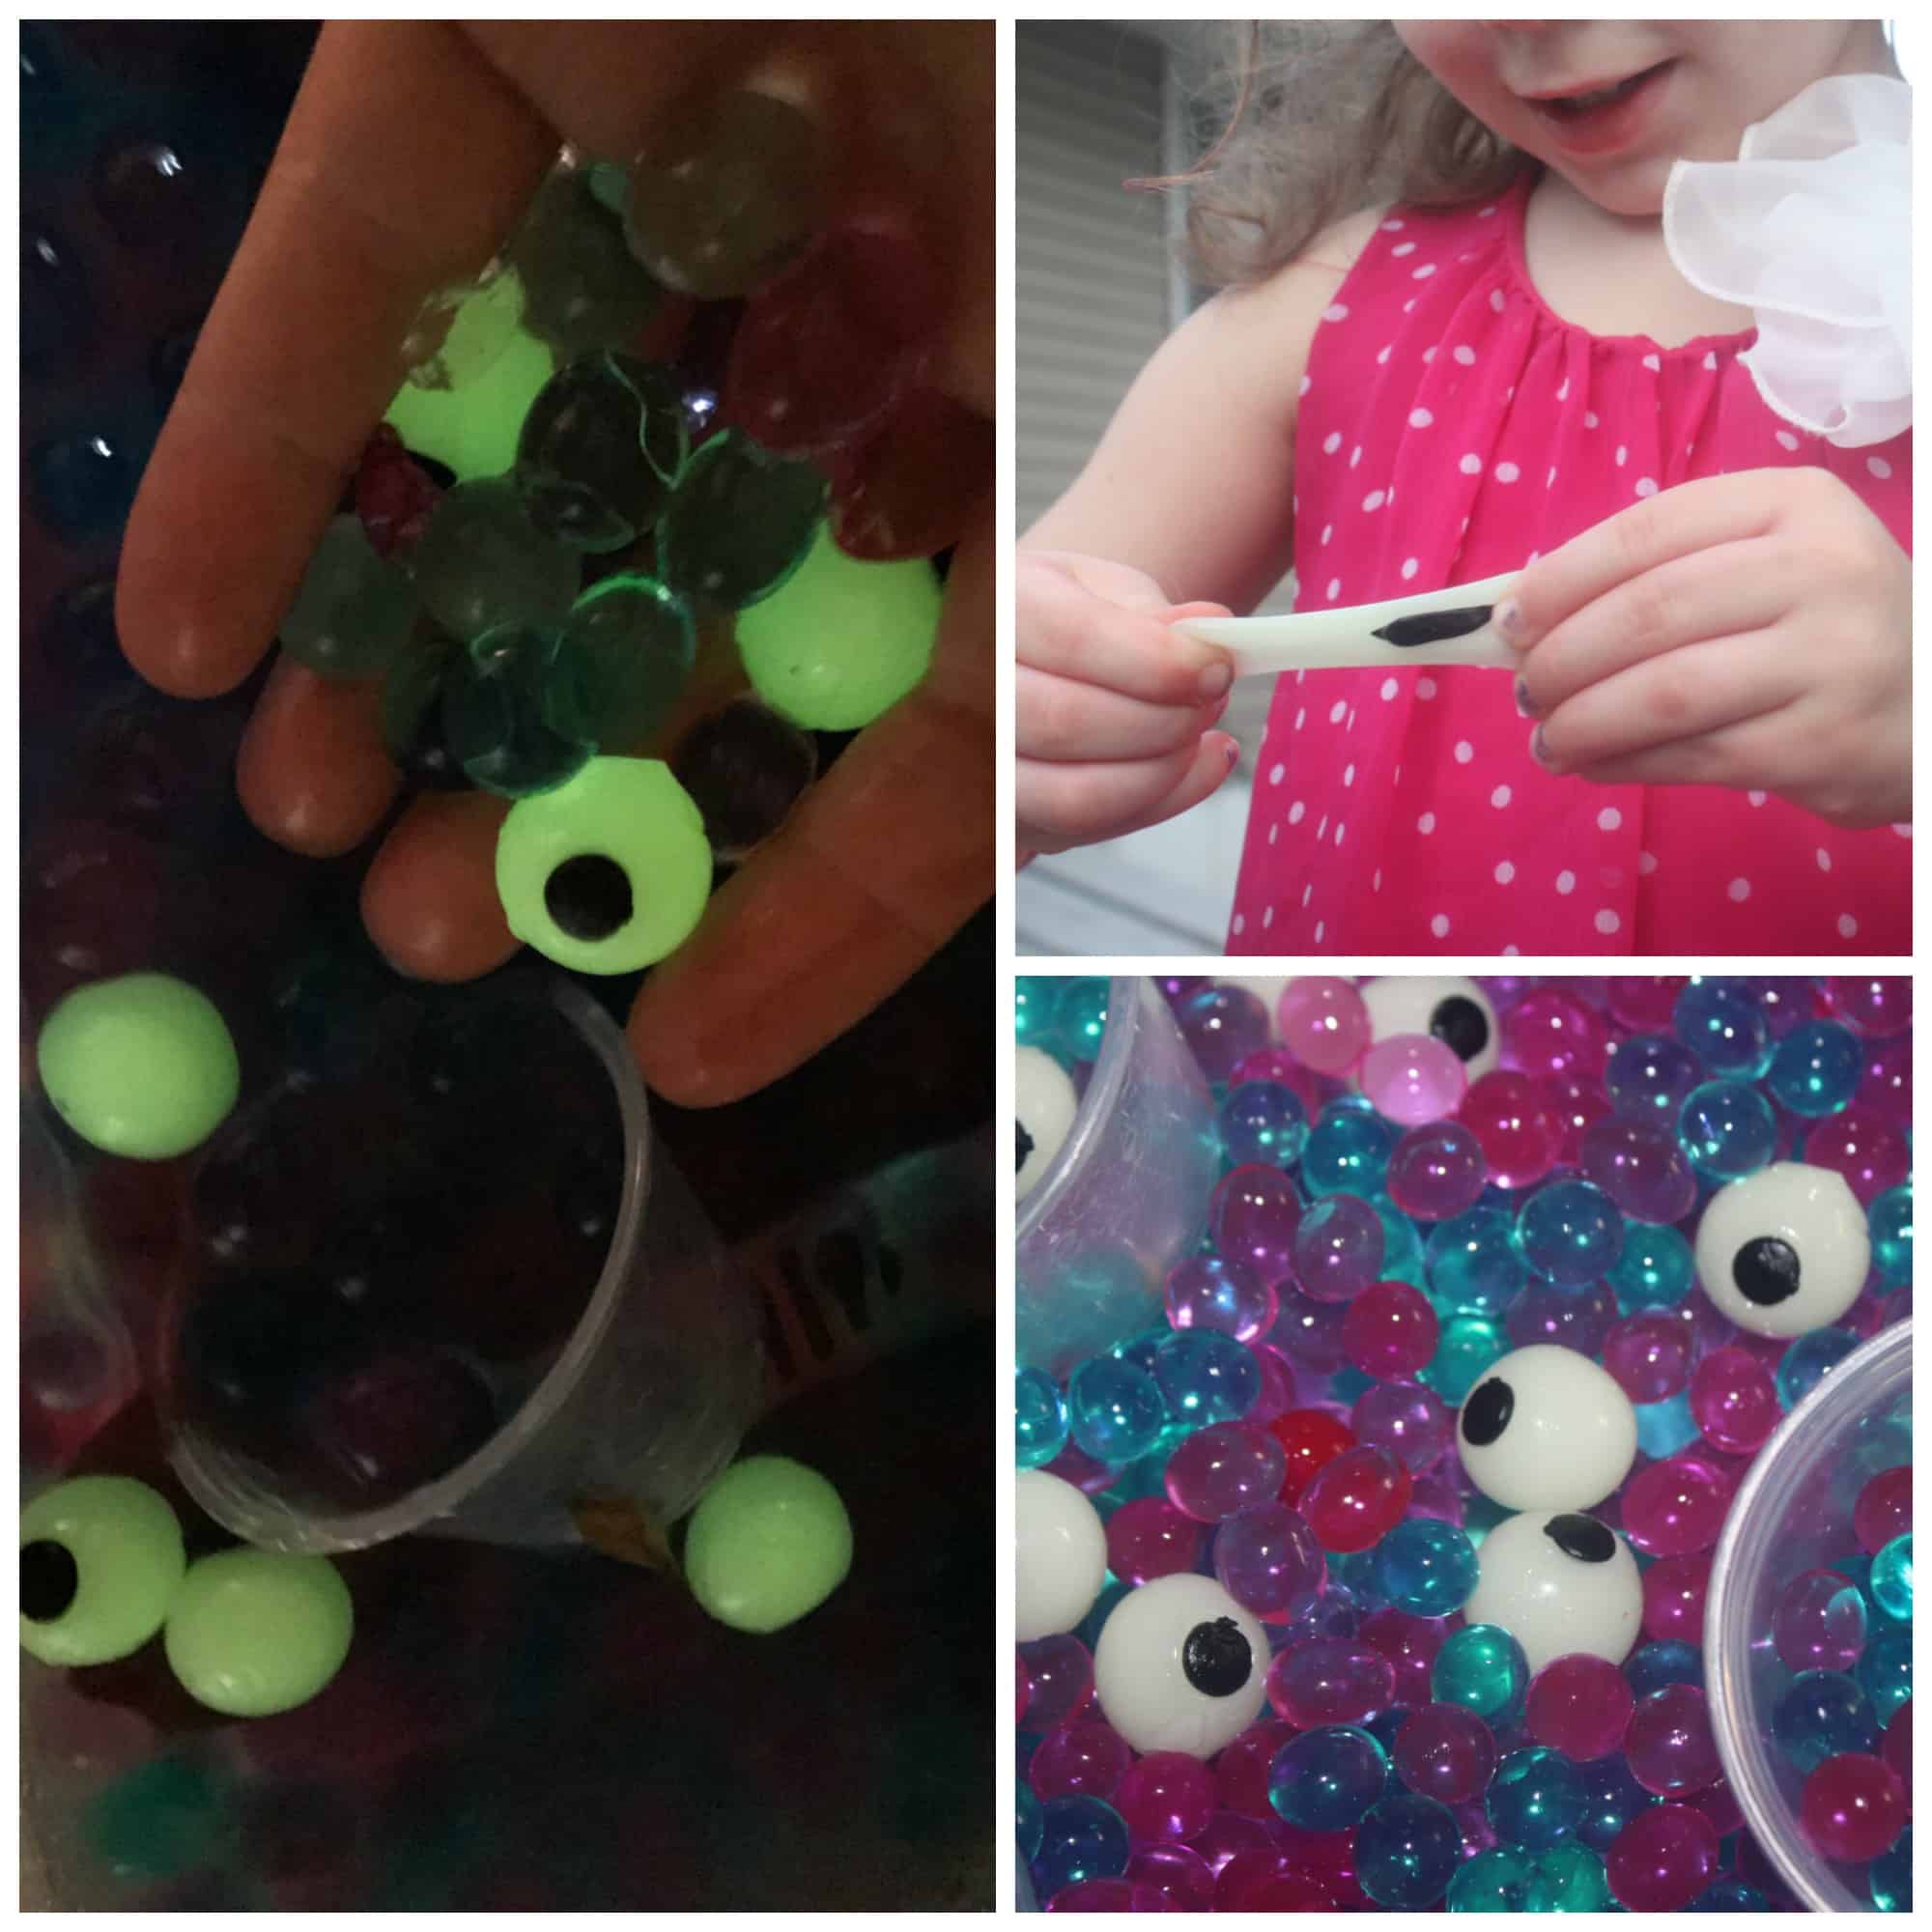 This monster sensory bin is the perfect way to get ready for Halloween, engaging all the senses. It's fun by day, and spooky by night!